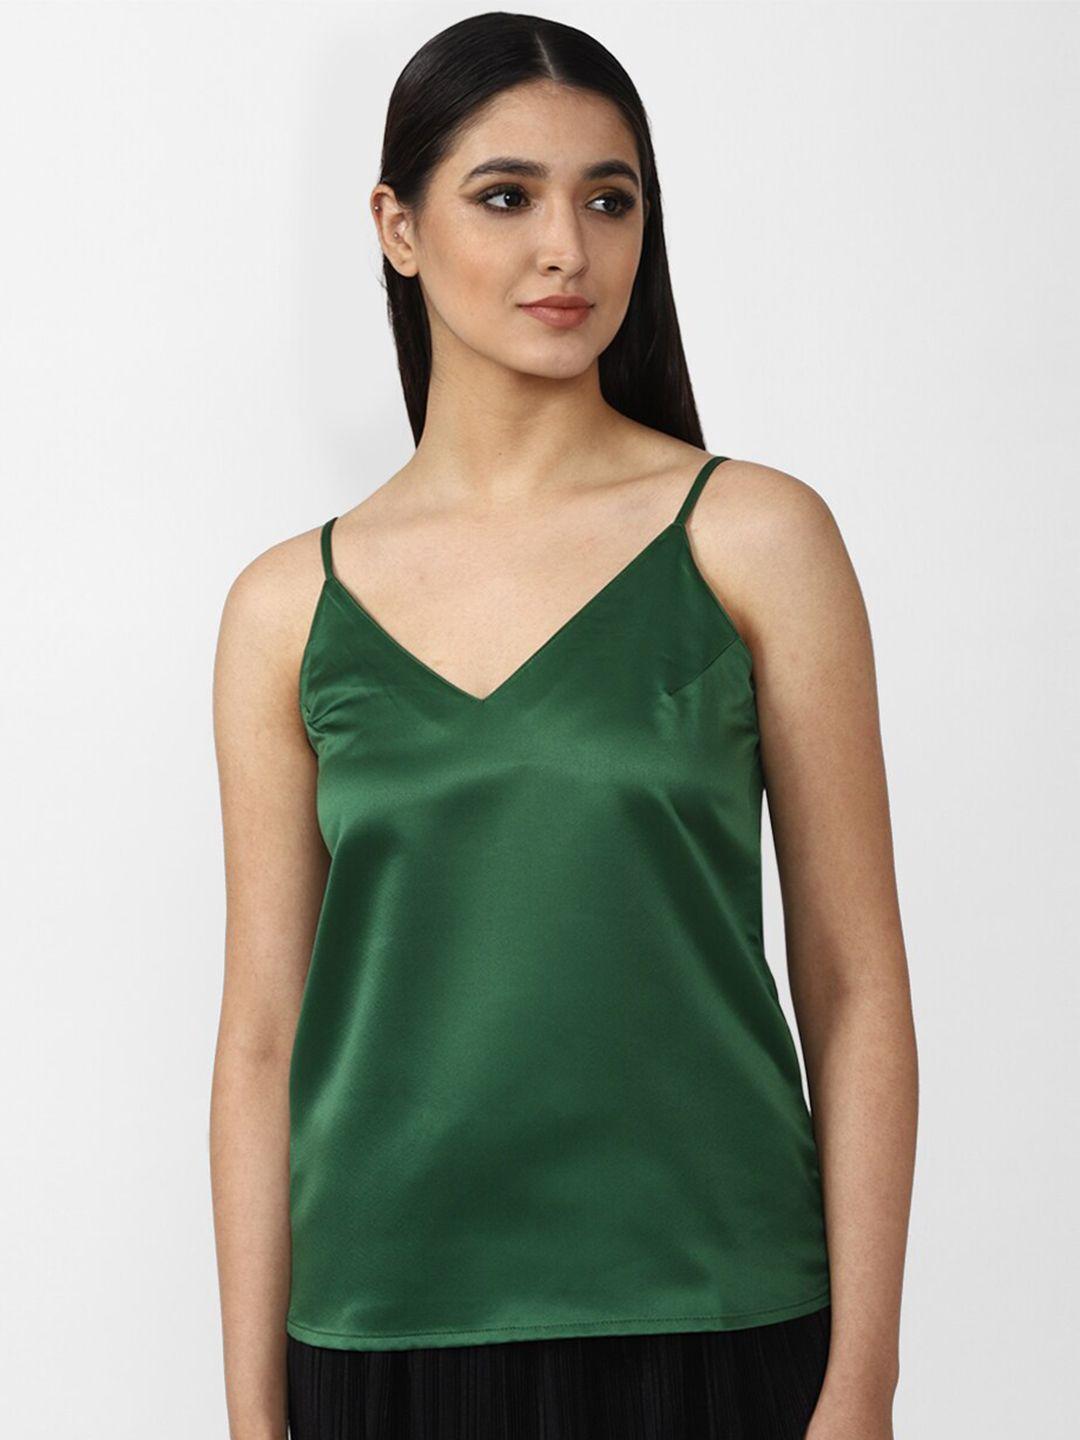 forever-21-women-green-solid-top